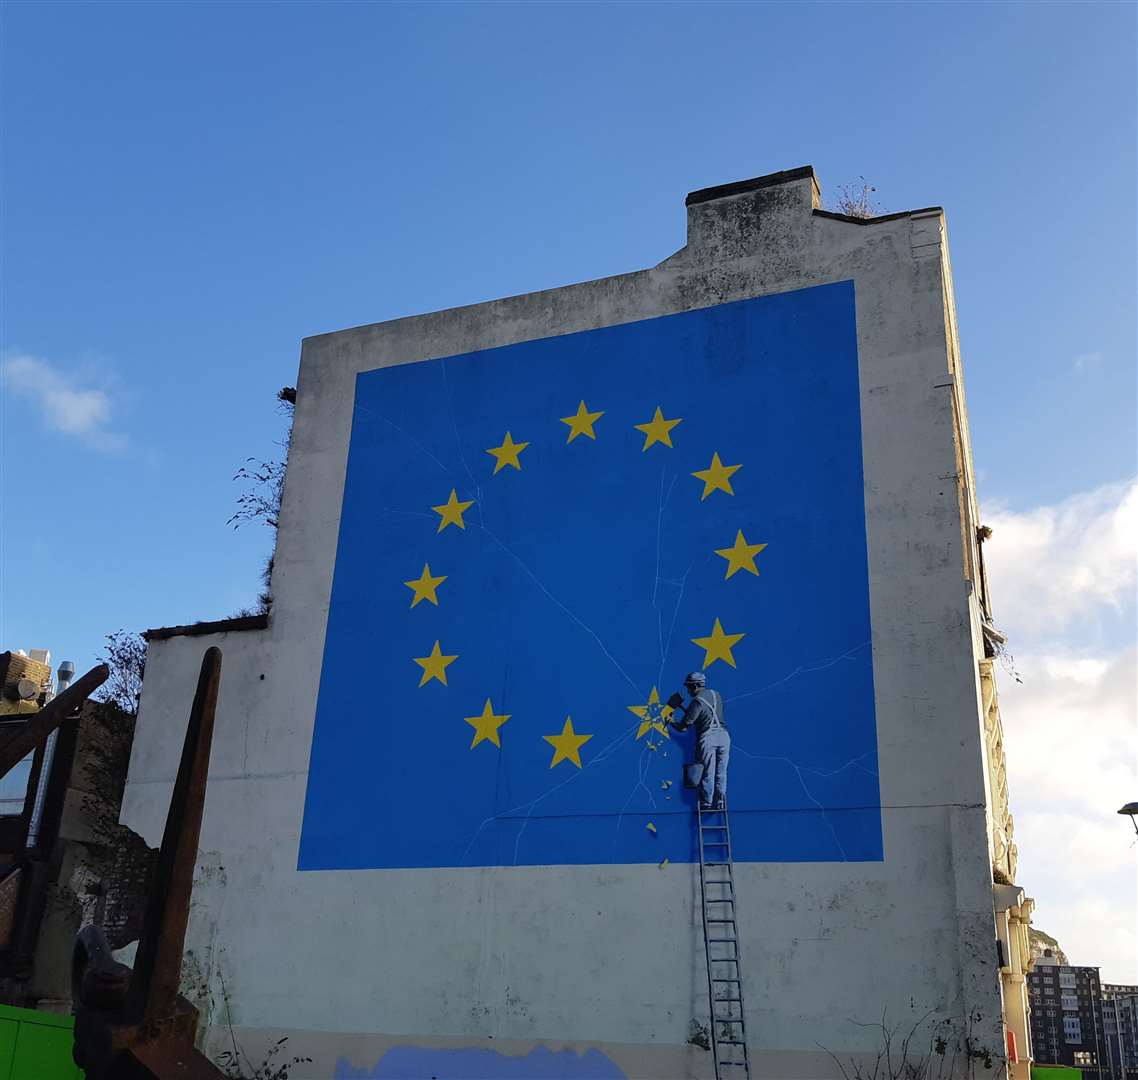 The iconic Banksy Brexit mural appeared overnight in Dover in May 2017